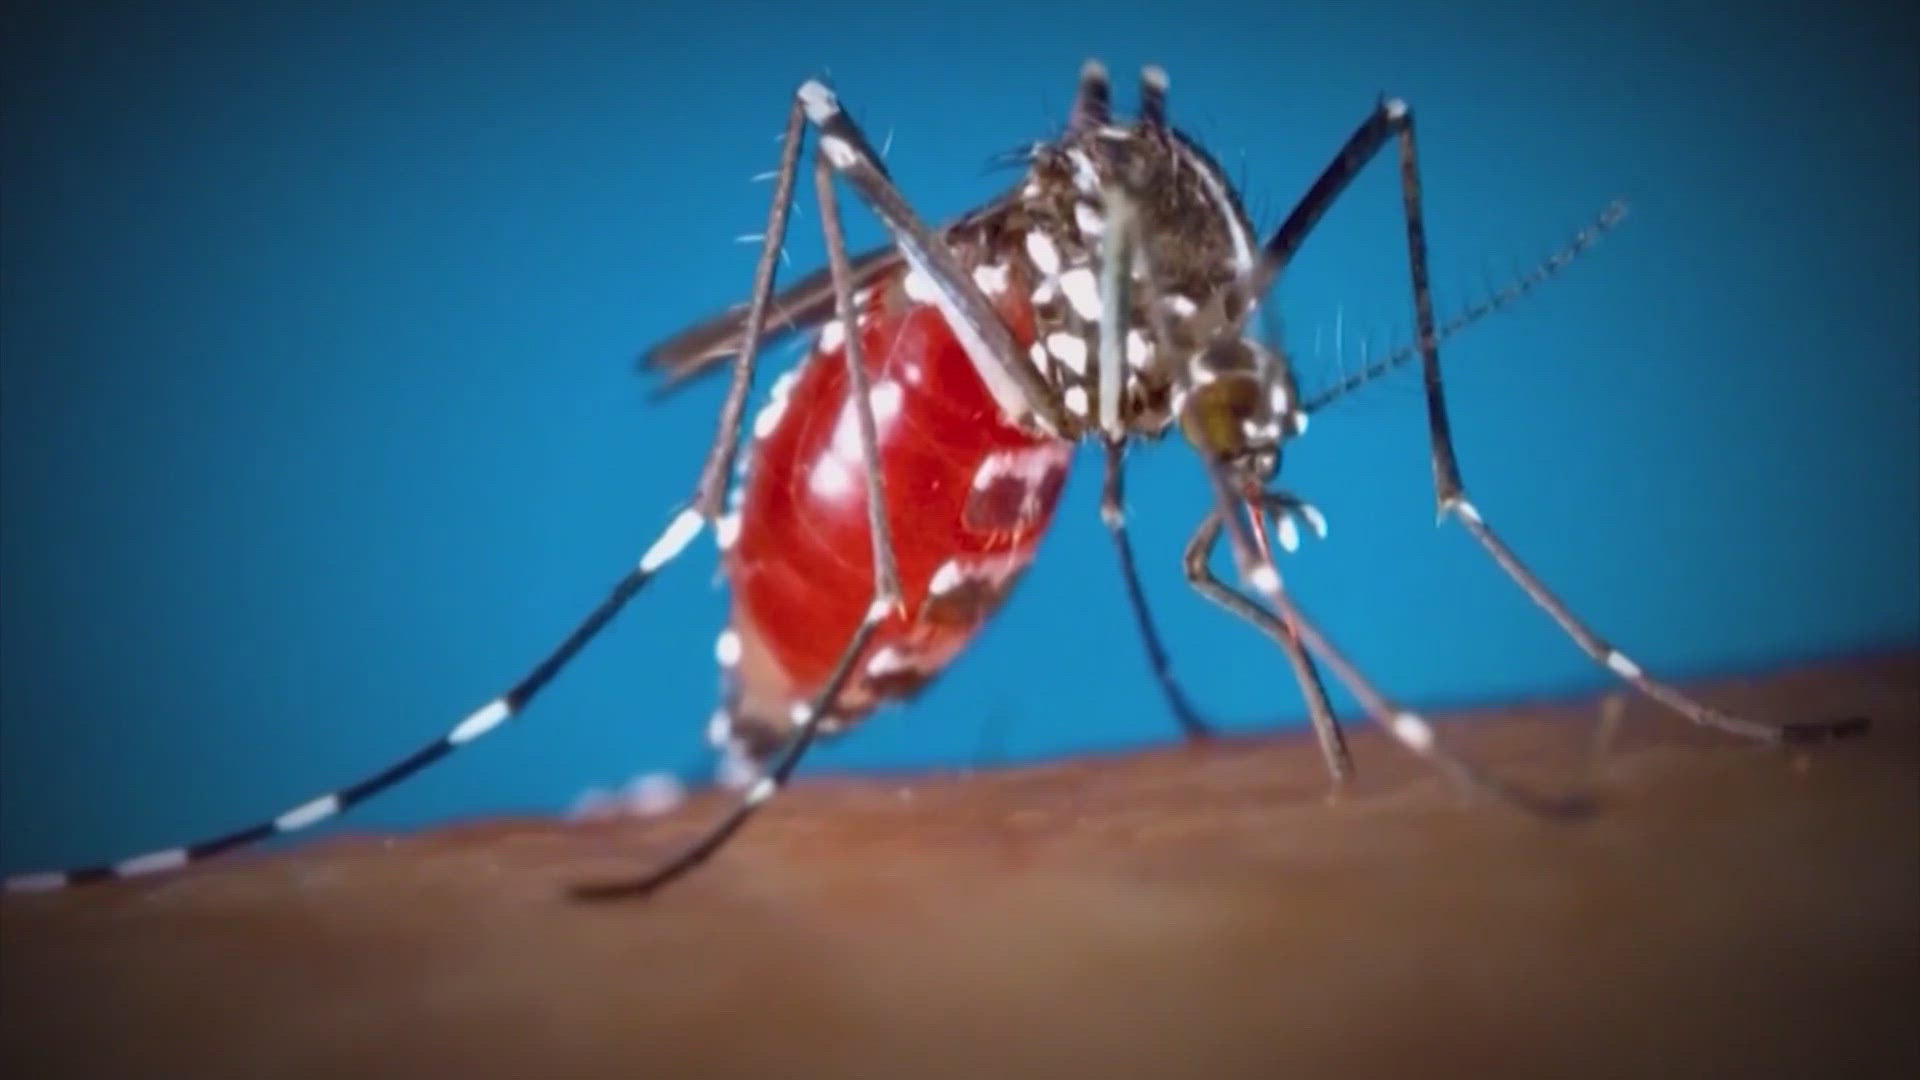 Here's what you can do to protect yourself from mosquitoes.